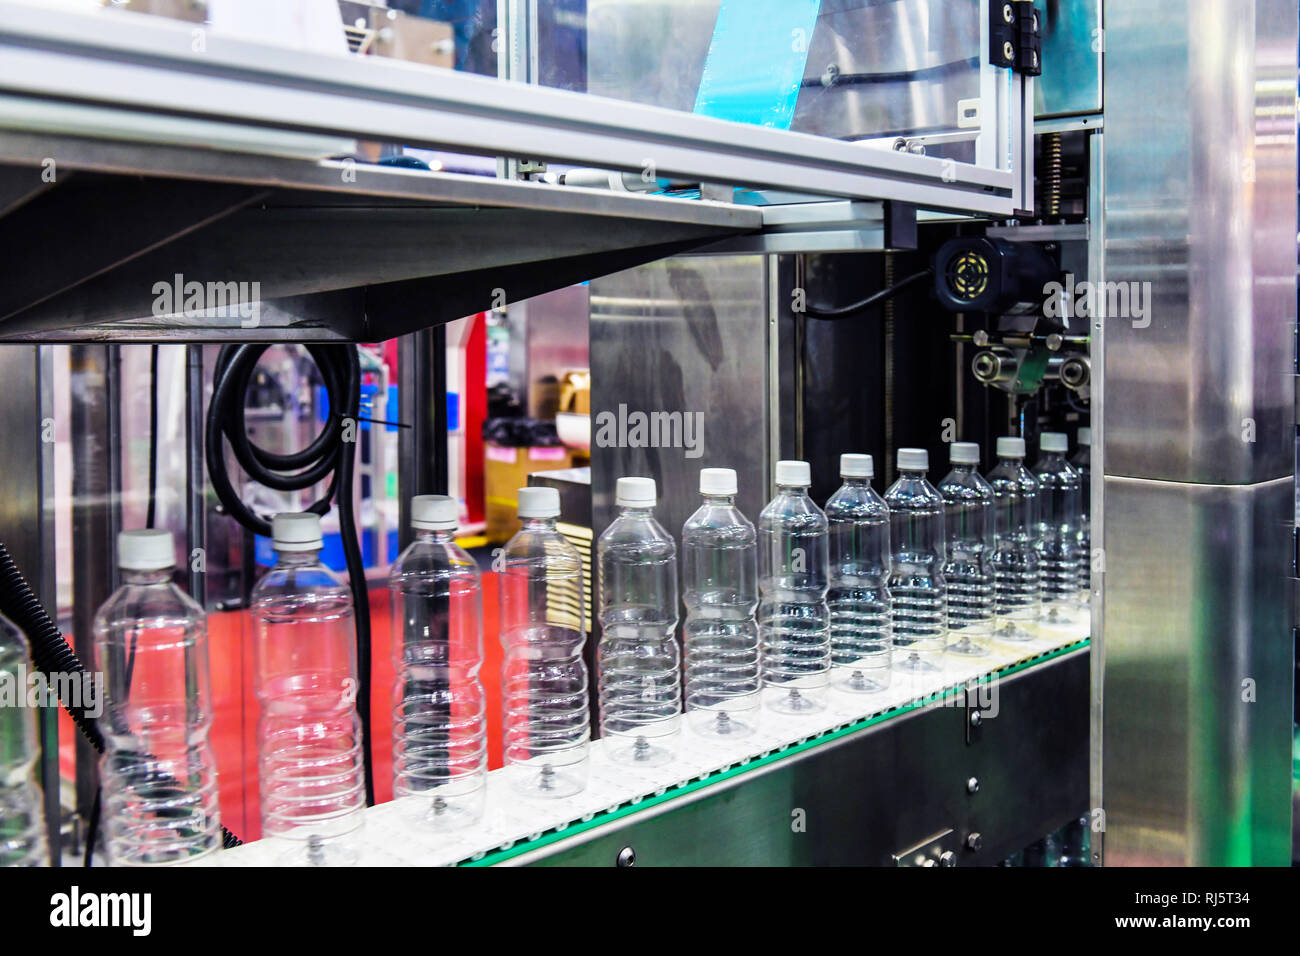 Clear Bottles transfer on Automated conveyor systems industrial automation for package Stock Photo